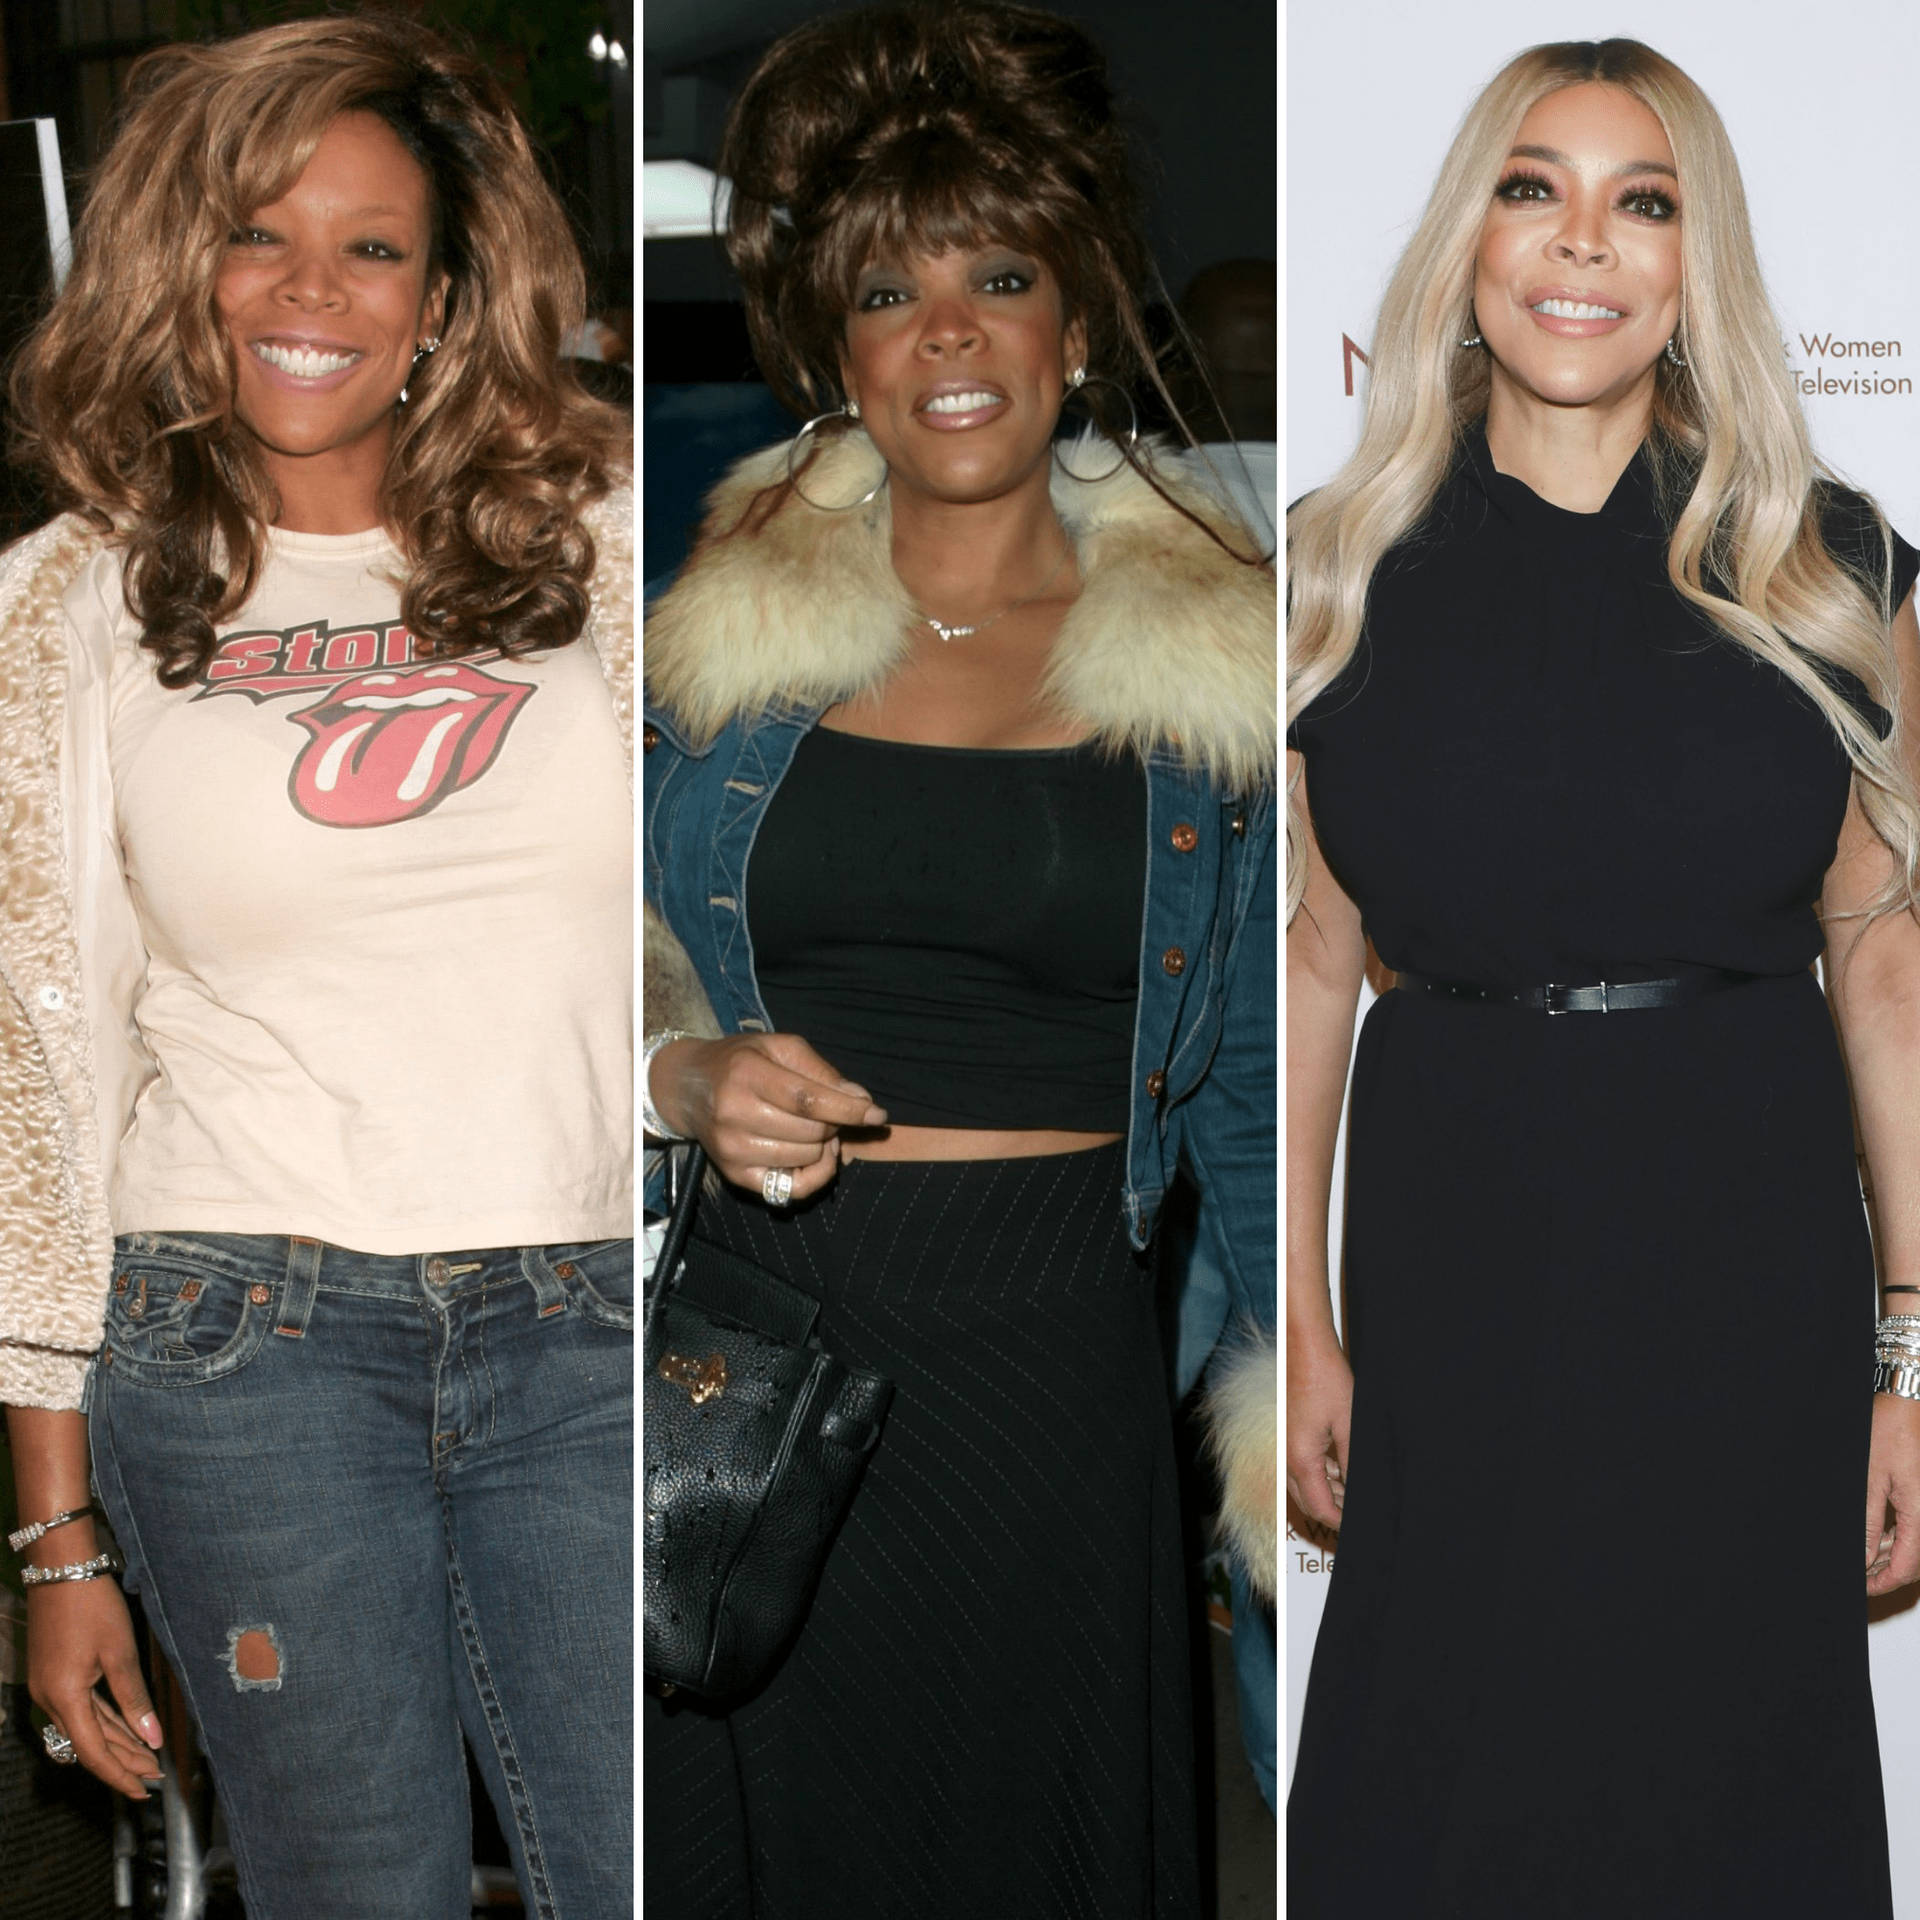 Download Wendy Williams Over The Years Wallpaper | Wallpapers.com